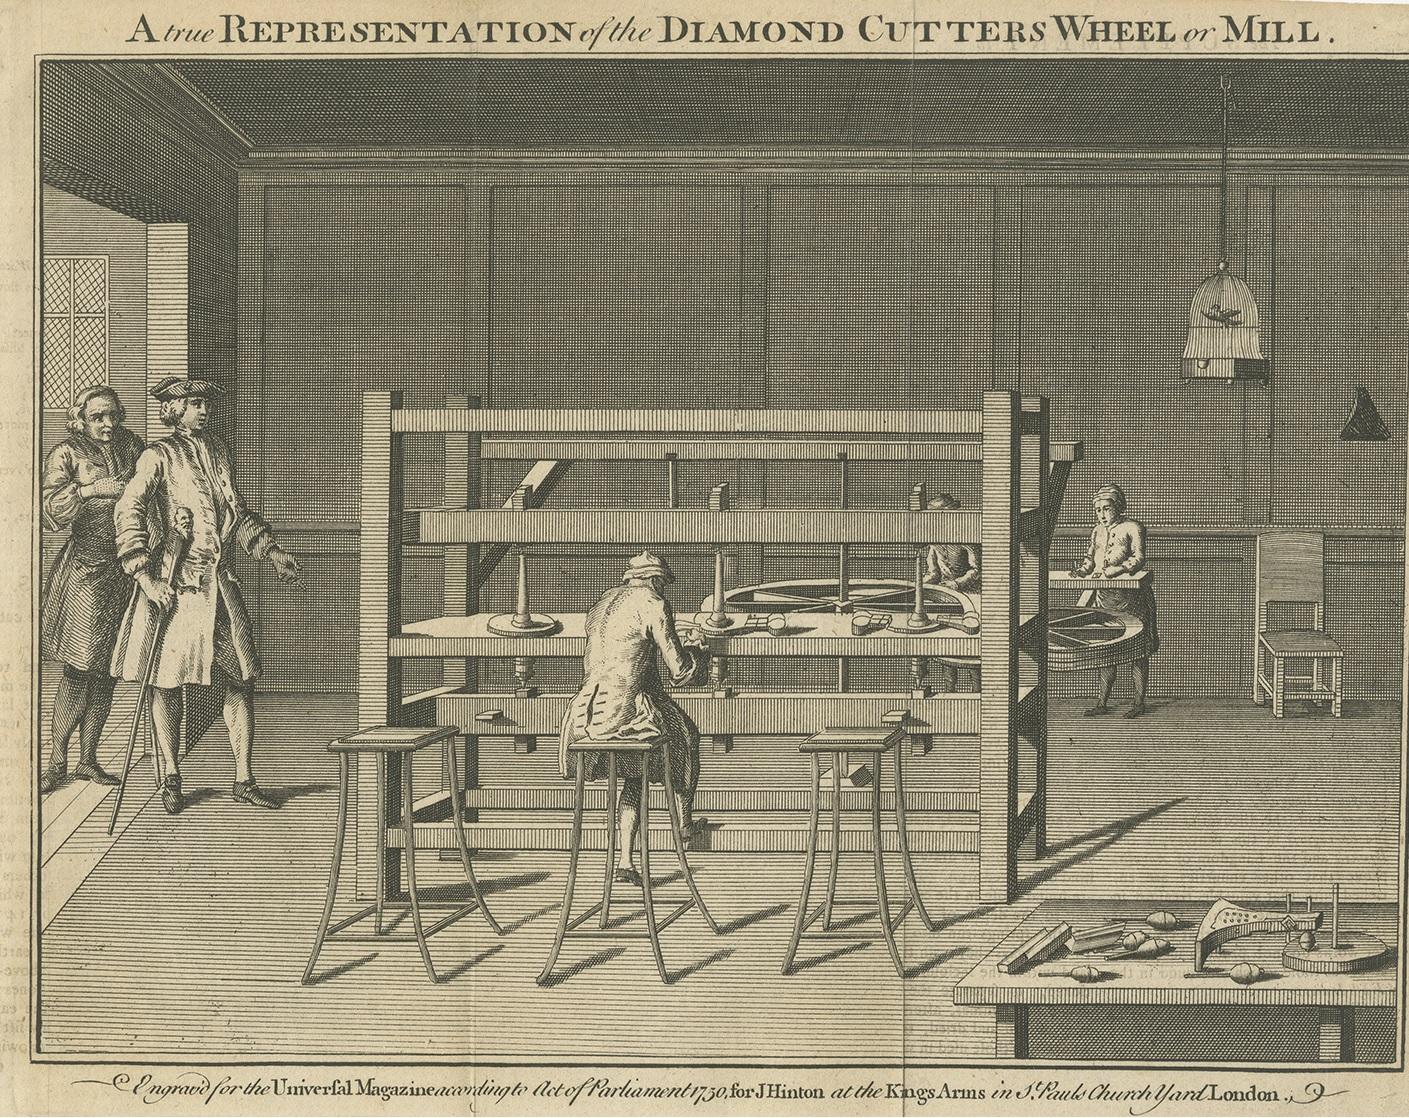 Antique print titled 'A true Representation of the Diamond Cutters Wheel or Mill'. 

View of a man working at a large diamond-cutting machine with two men working at wheels behind him. This print originates from 'The Universal Magazine' published by